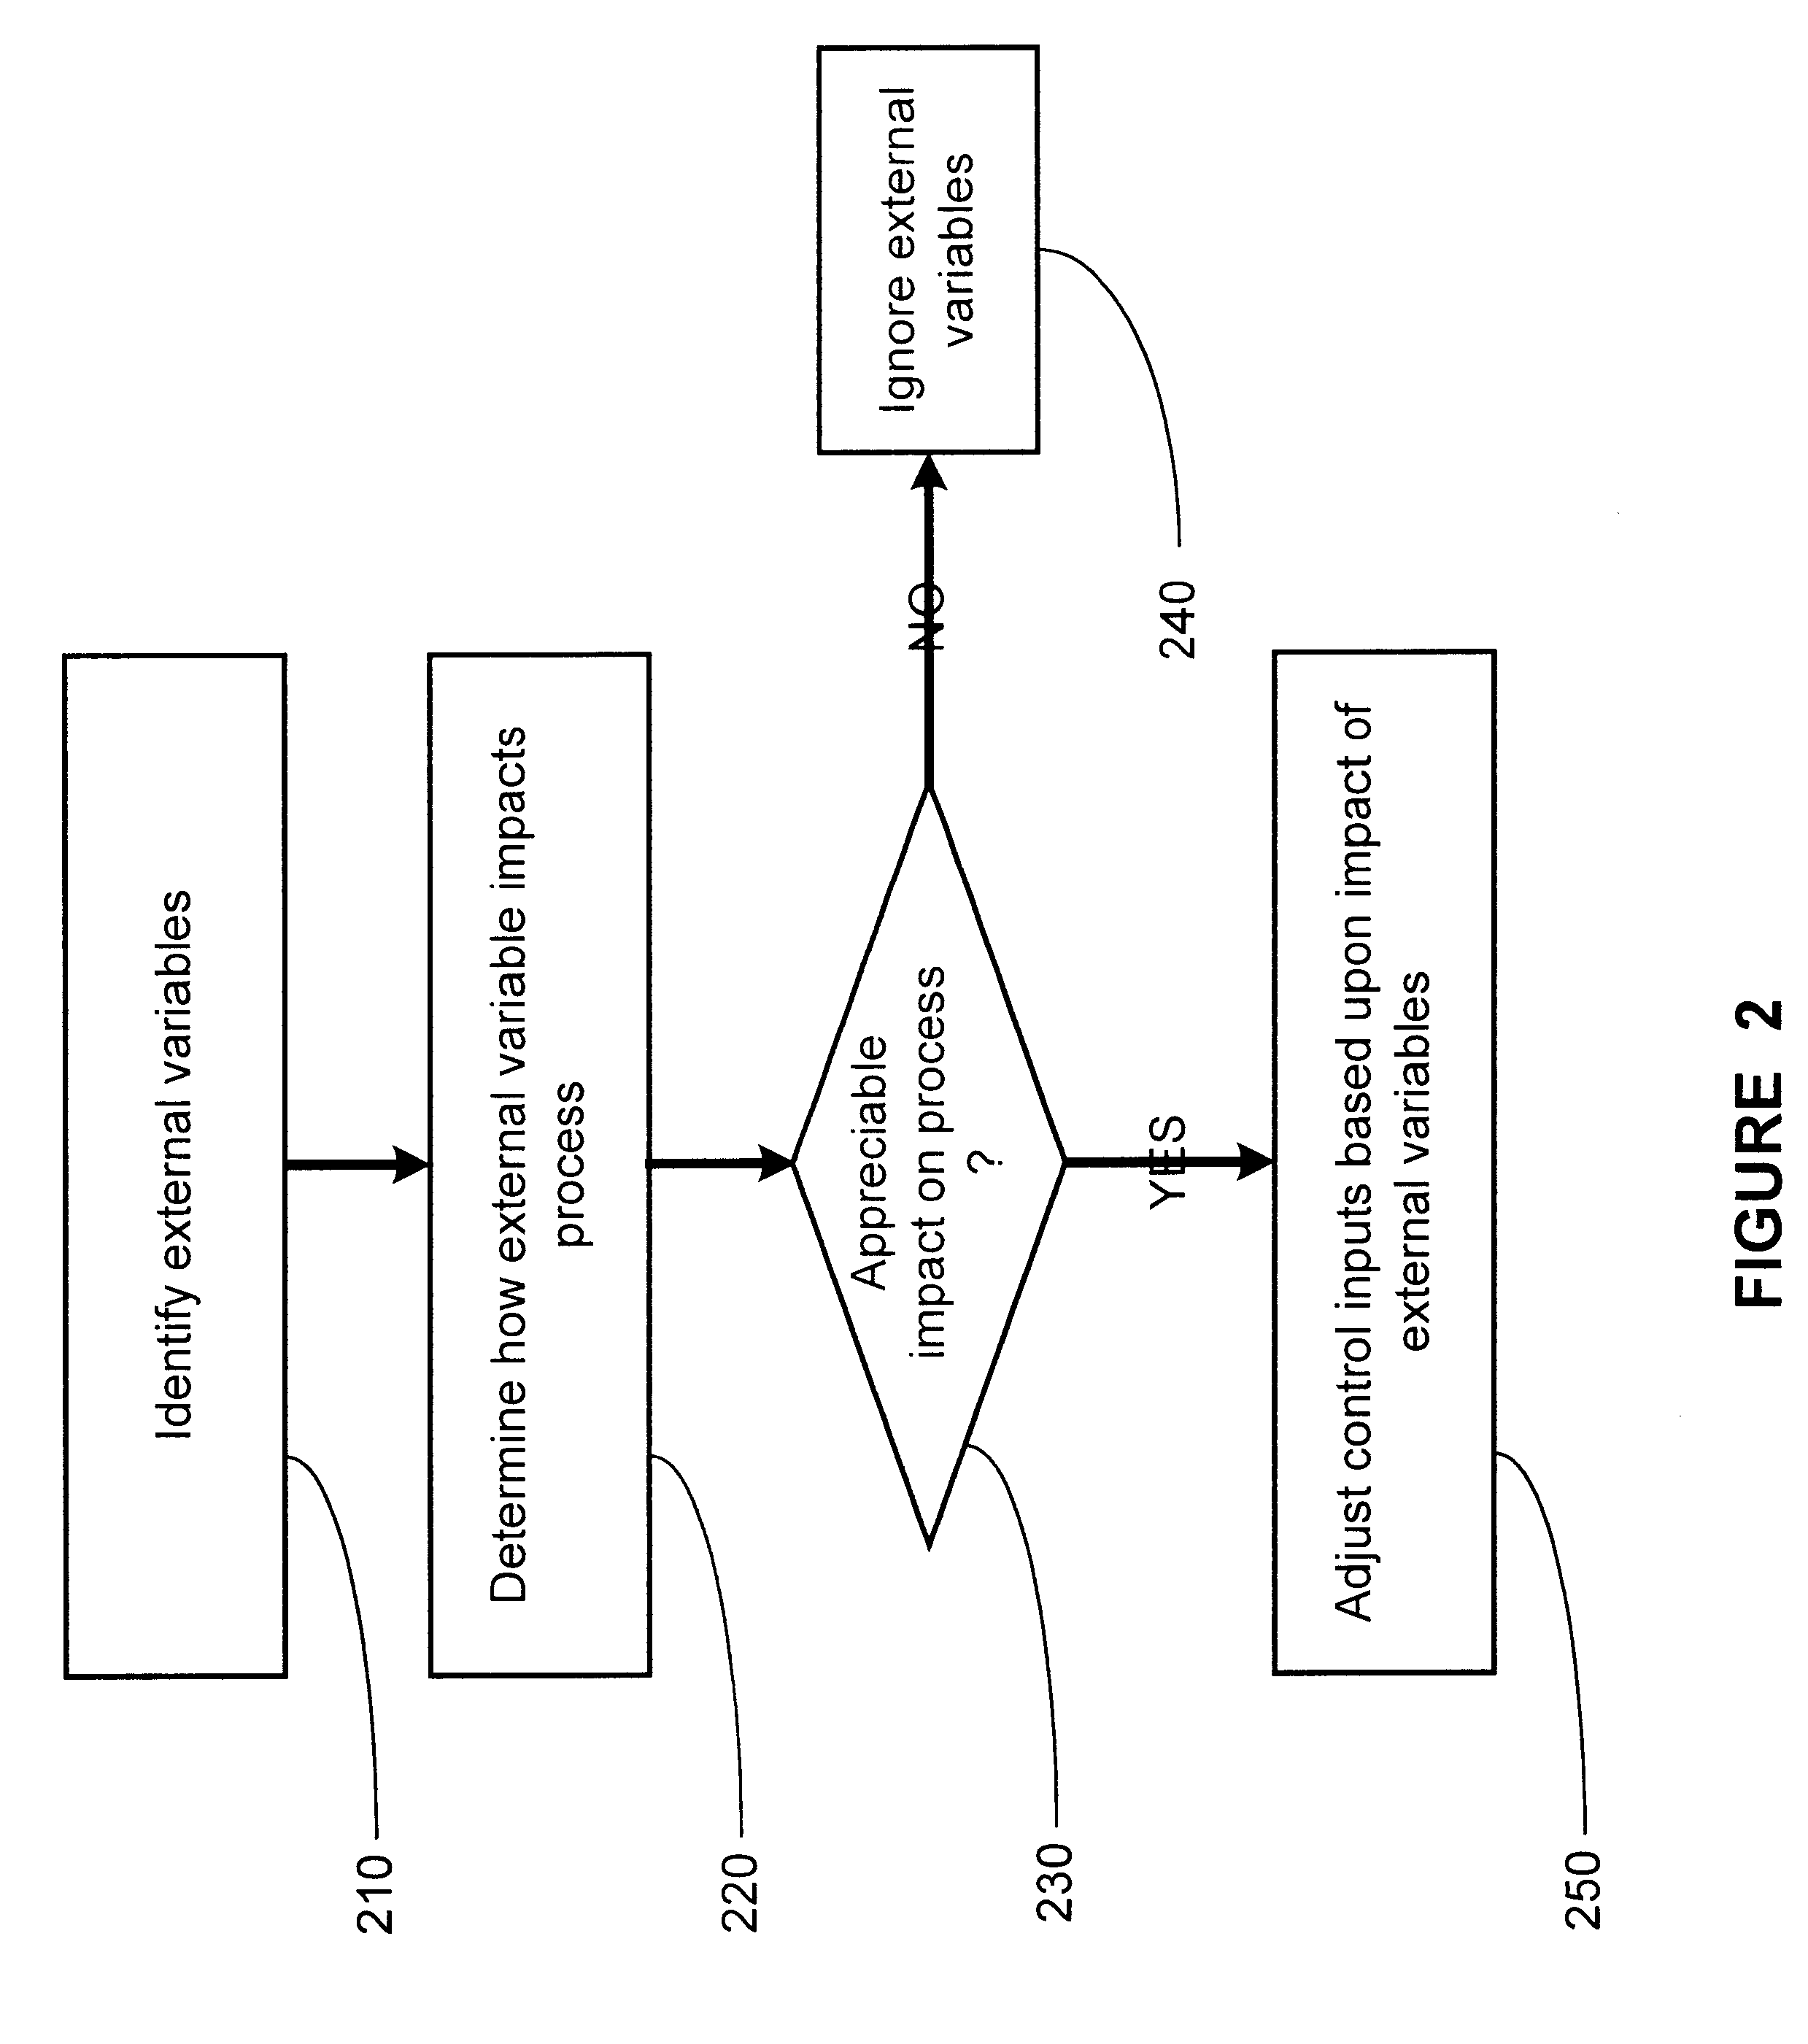 Method and apparatus for dynamic model building based on machine disturbances for run-to-run control of semiconductor devices